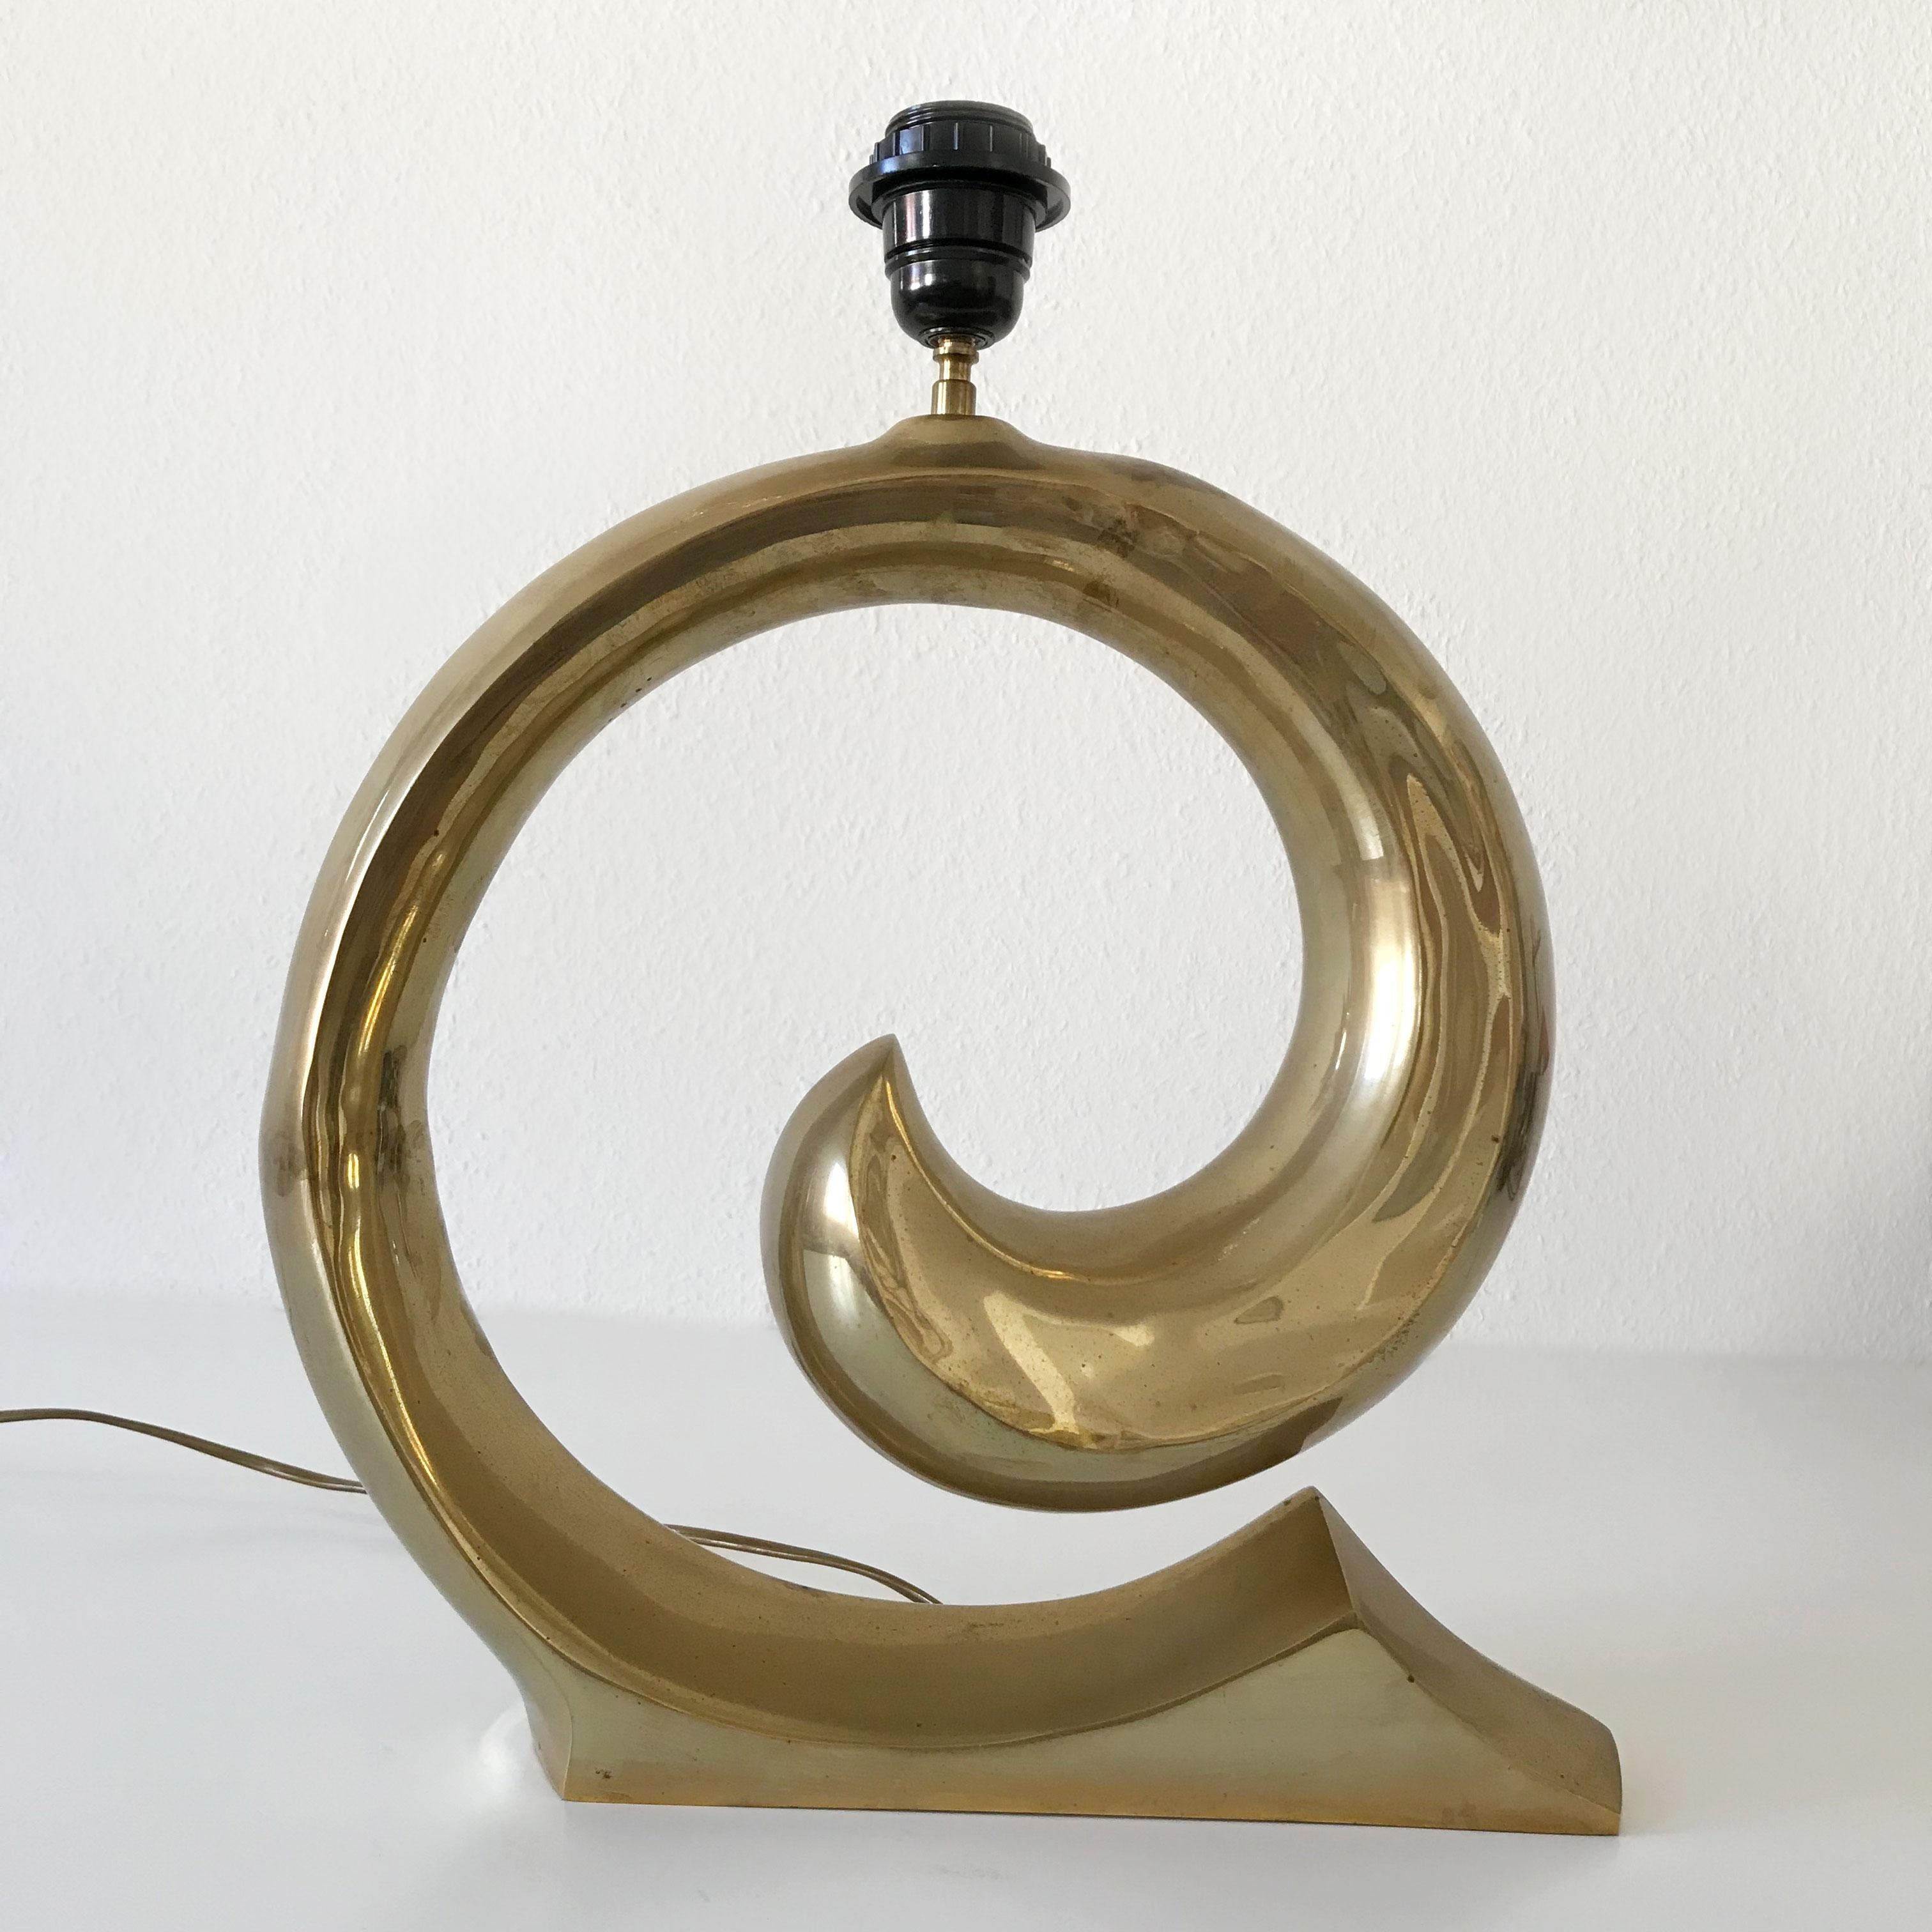 French Sculptural Mid-Century Modern Brass Table Lamp by Pierre Cardin, 1970s, France